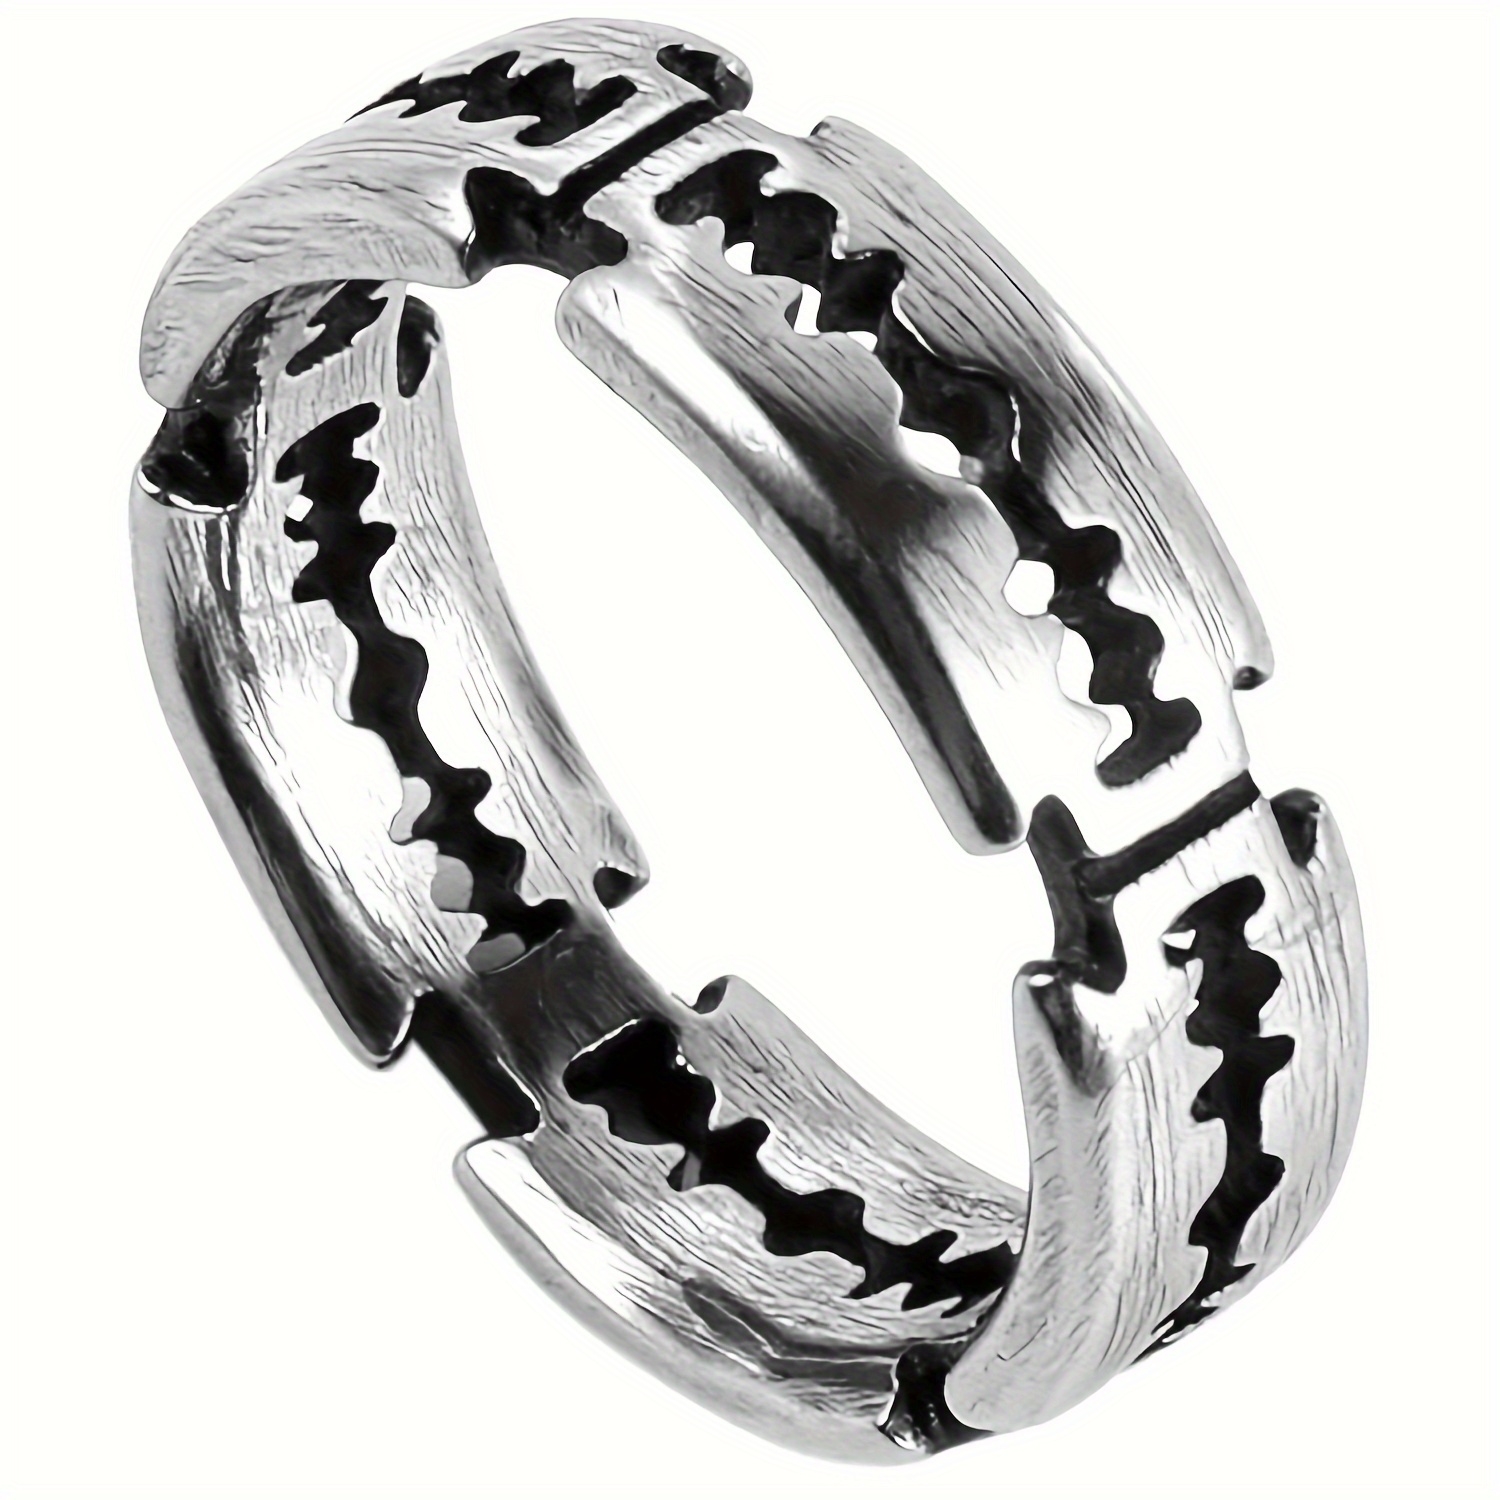 Razor Blade Ring With Knife Self Defense Spike Ring With Hidden